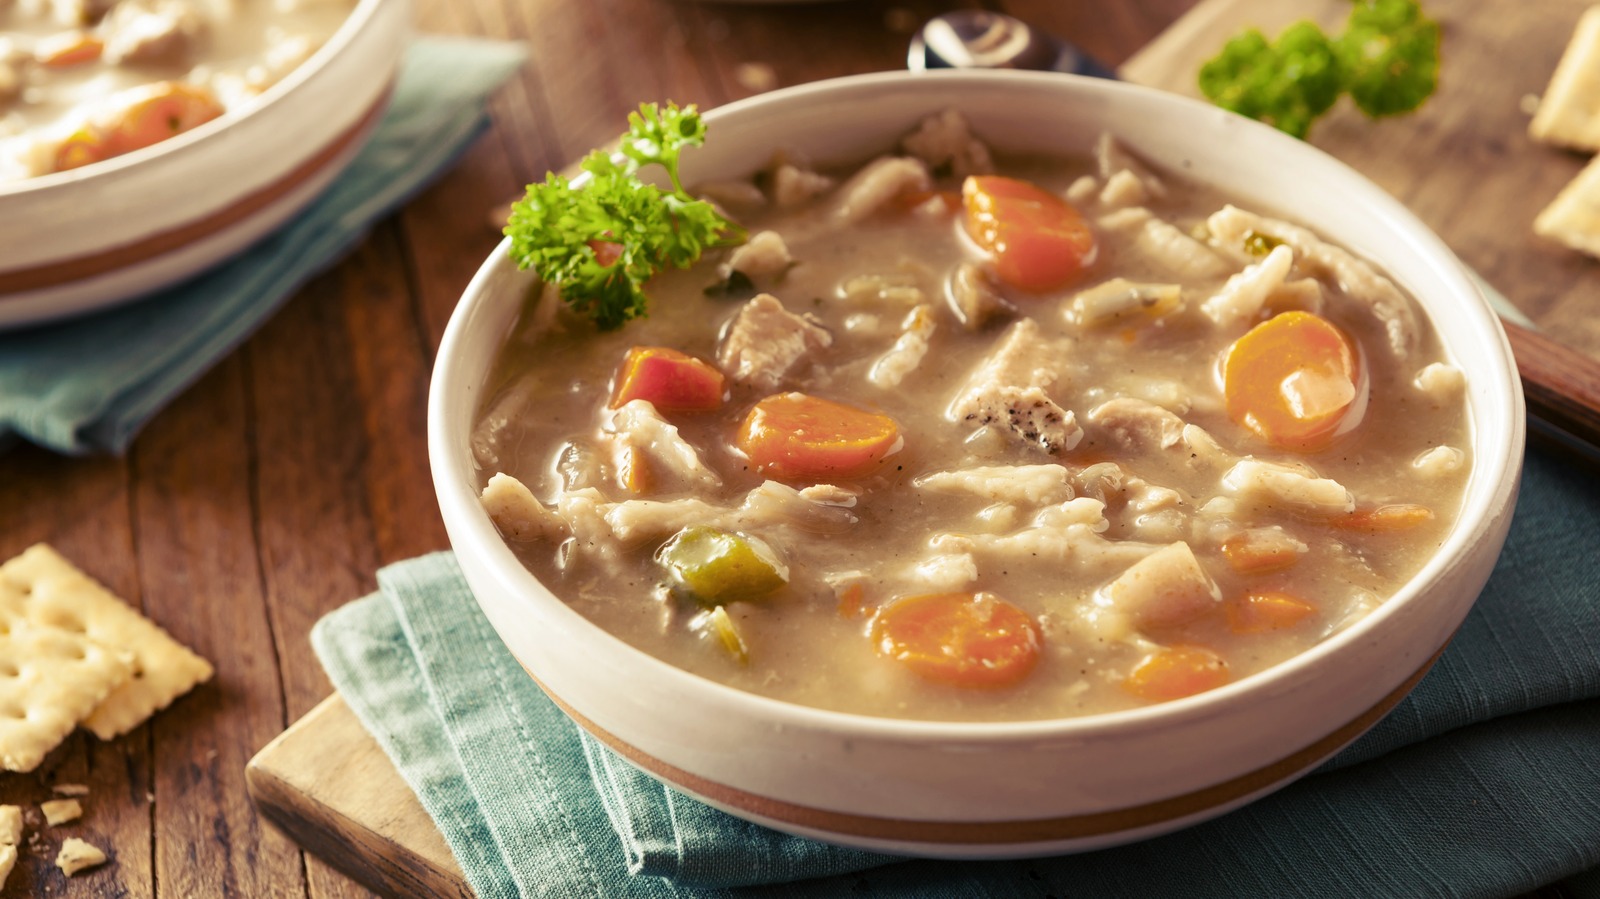 Chicken and dumplings with canned biscuits: try this easy recipe shortcut